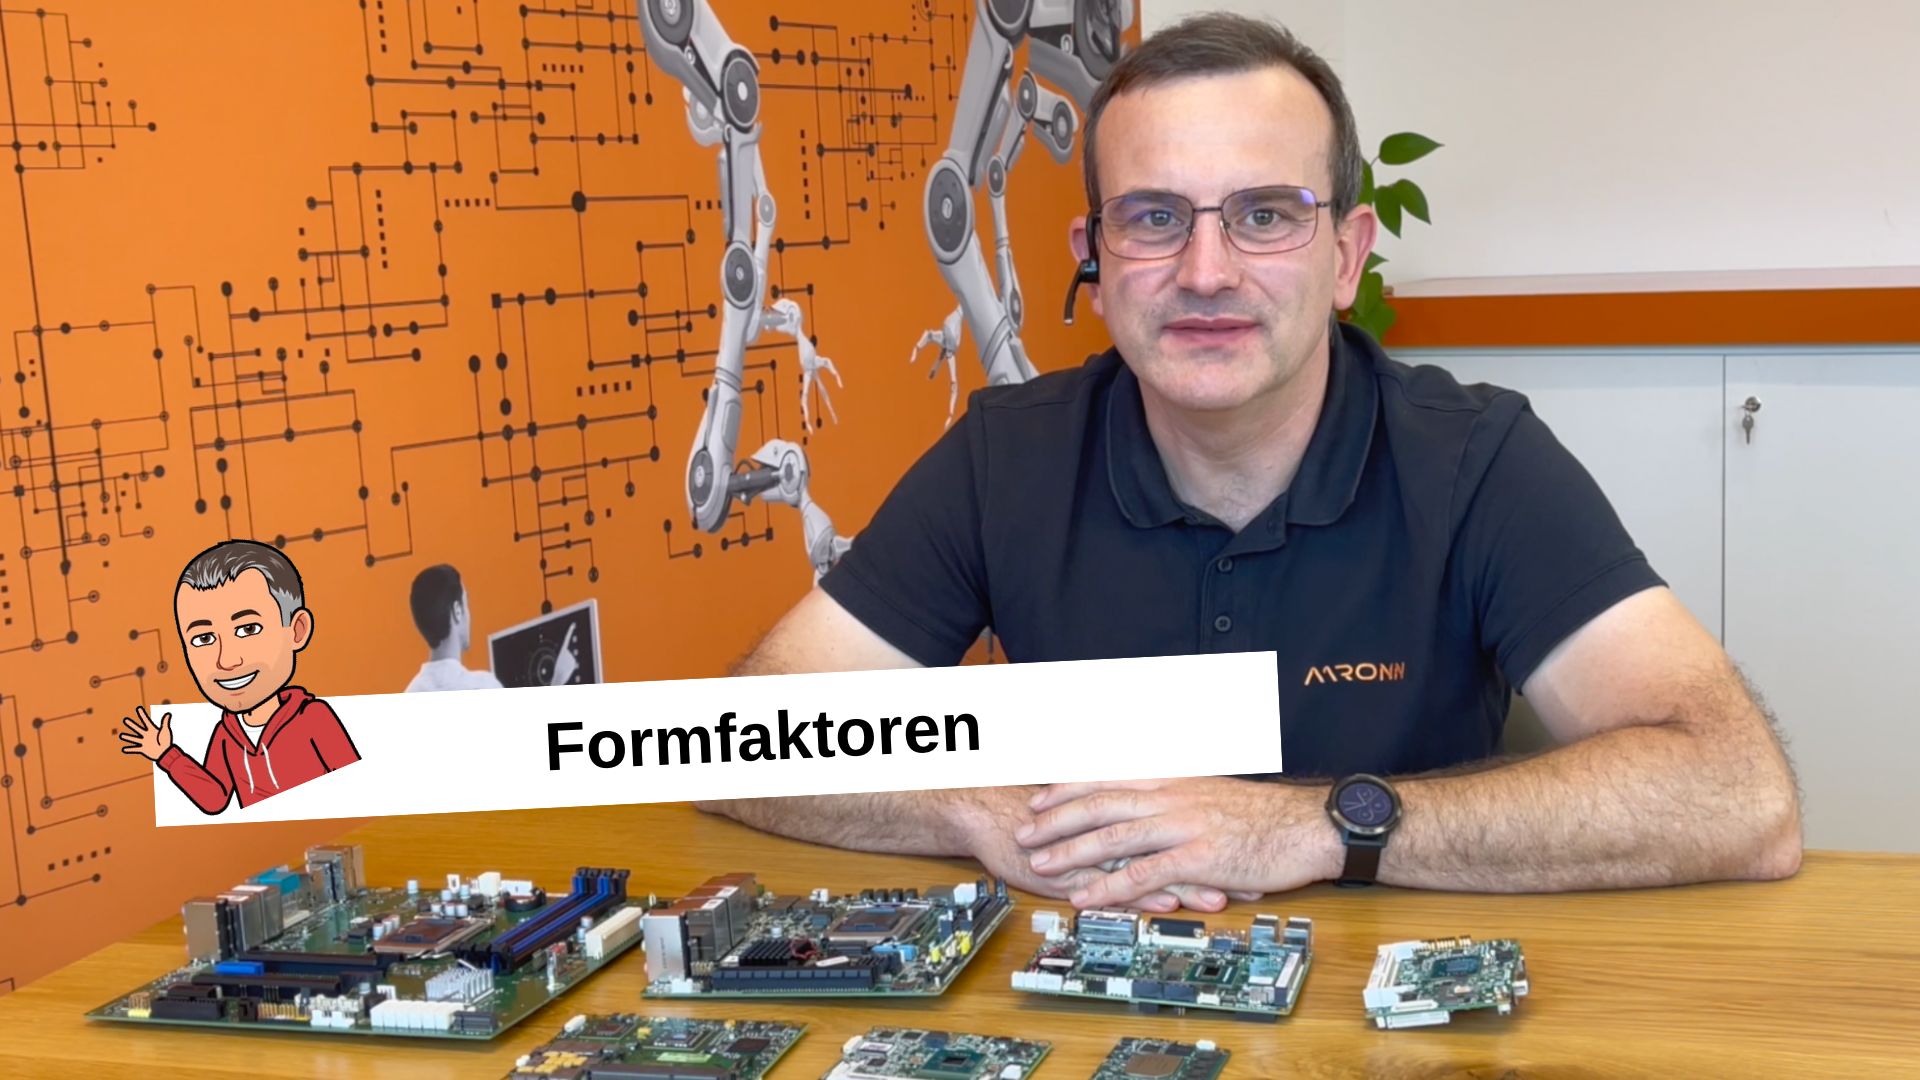 You are currently viewing Embedded Formfaktoren